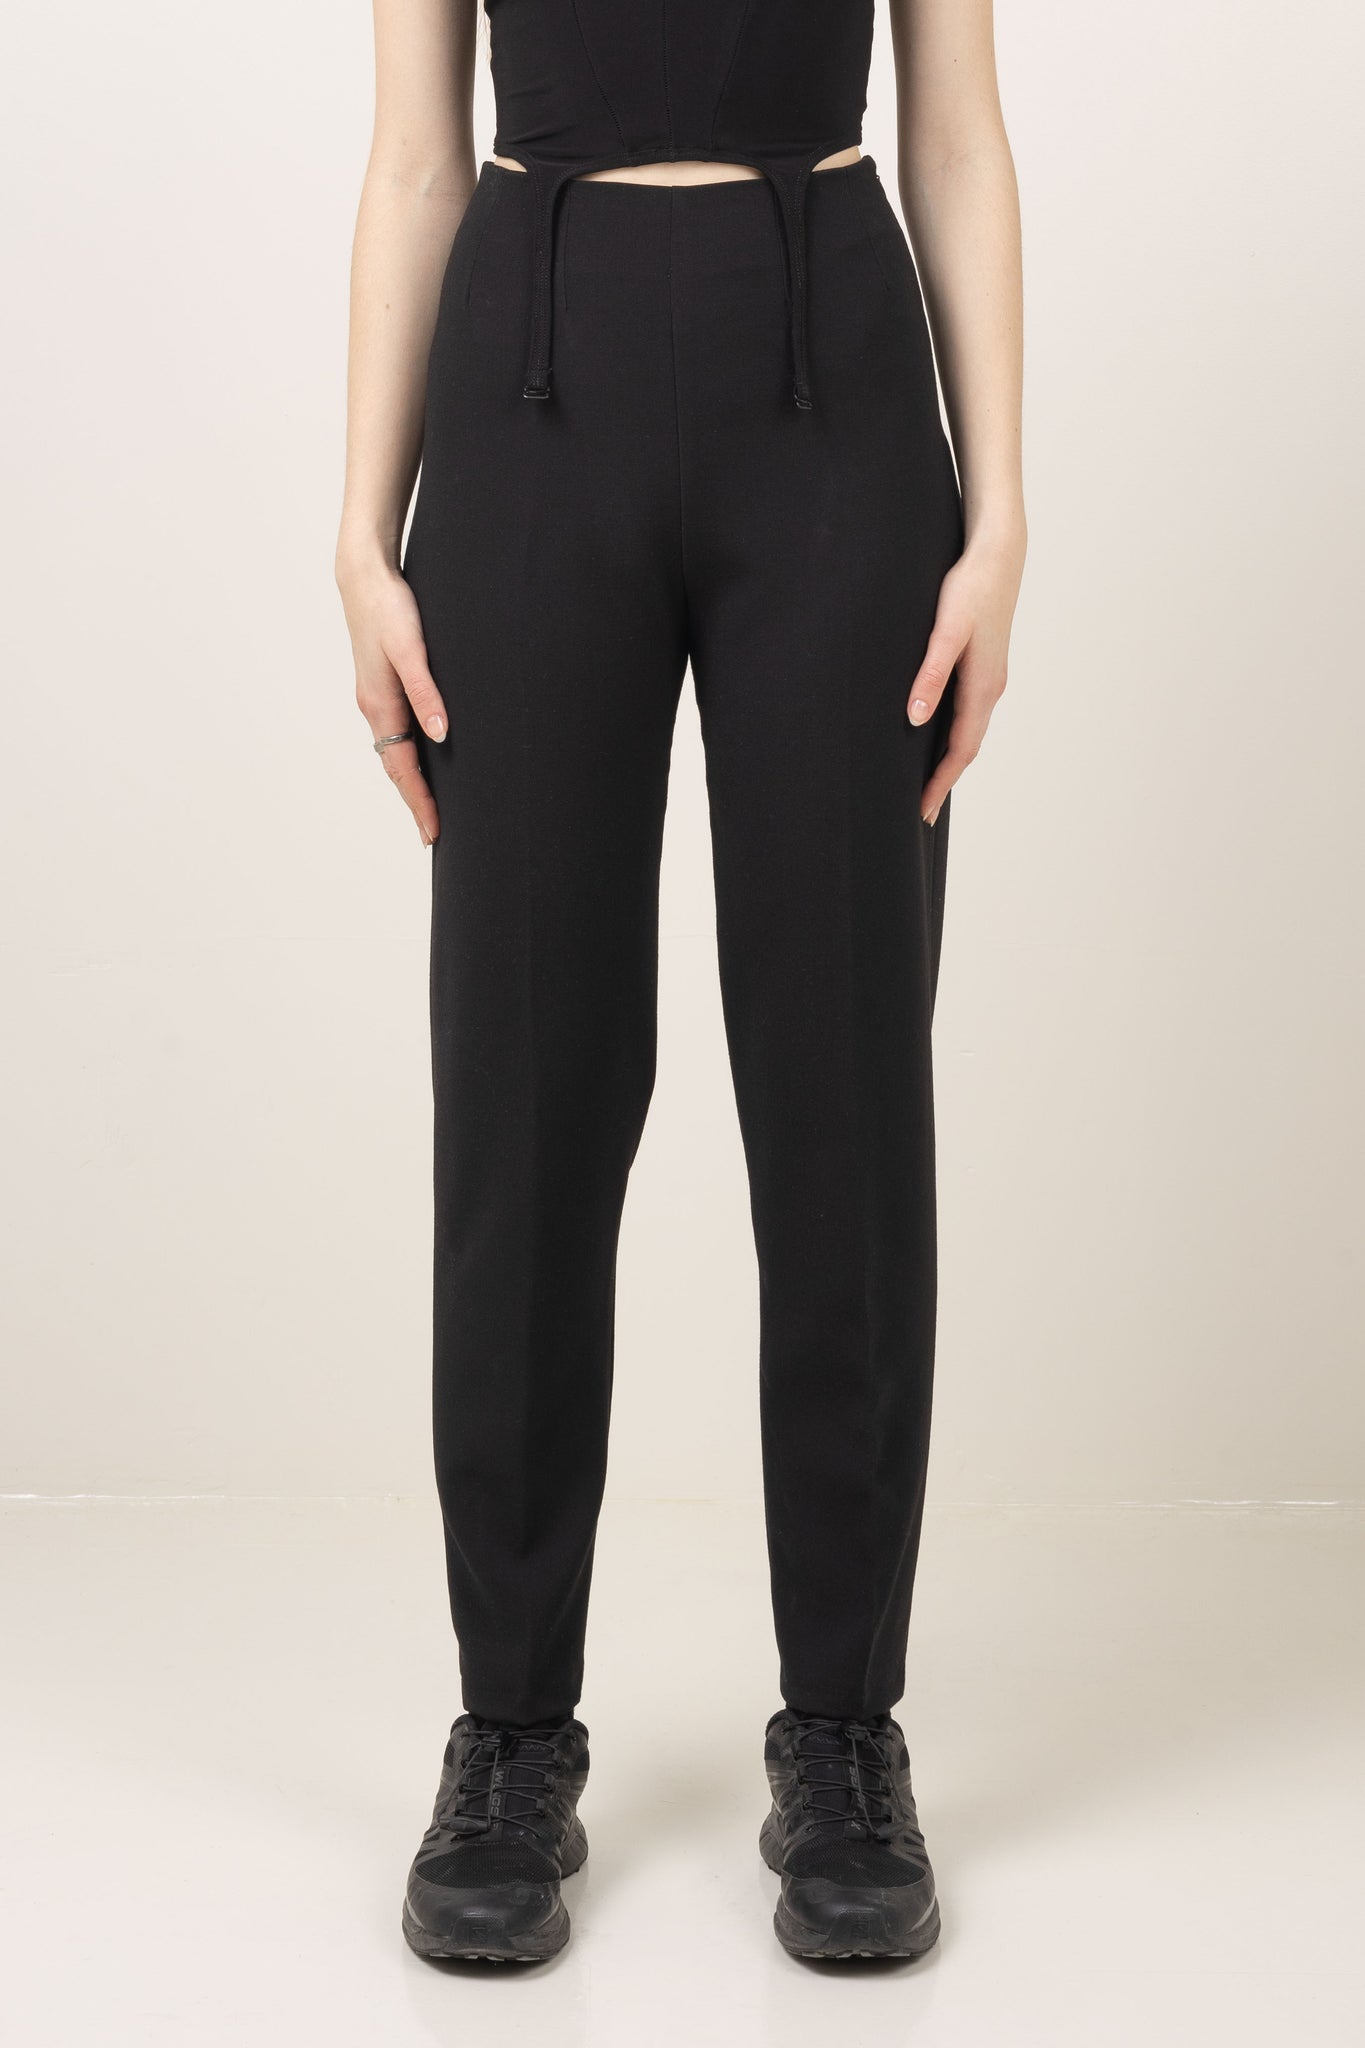 High waisted slim fit cigarette pants made with soft and stretchy knit and invisible zip closure at side seam